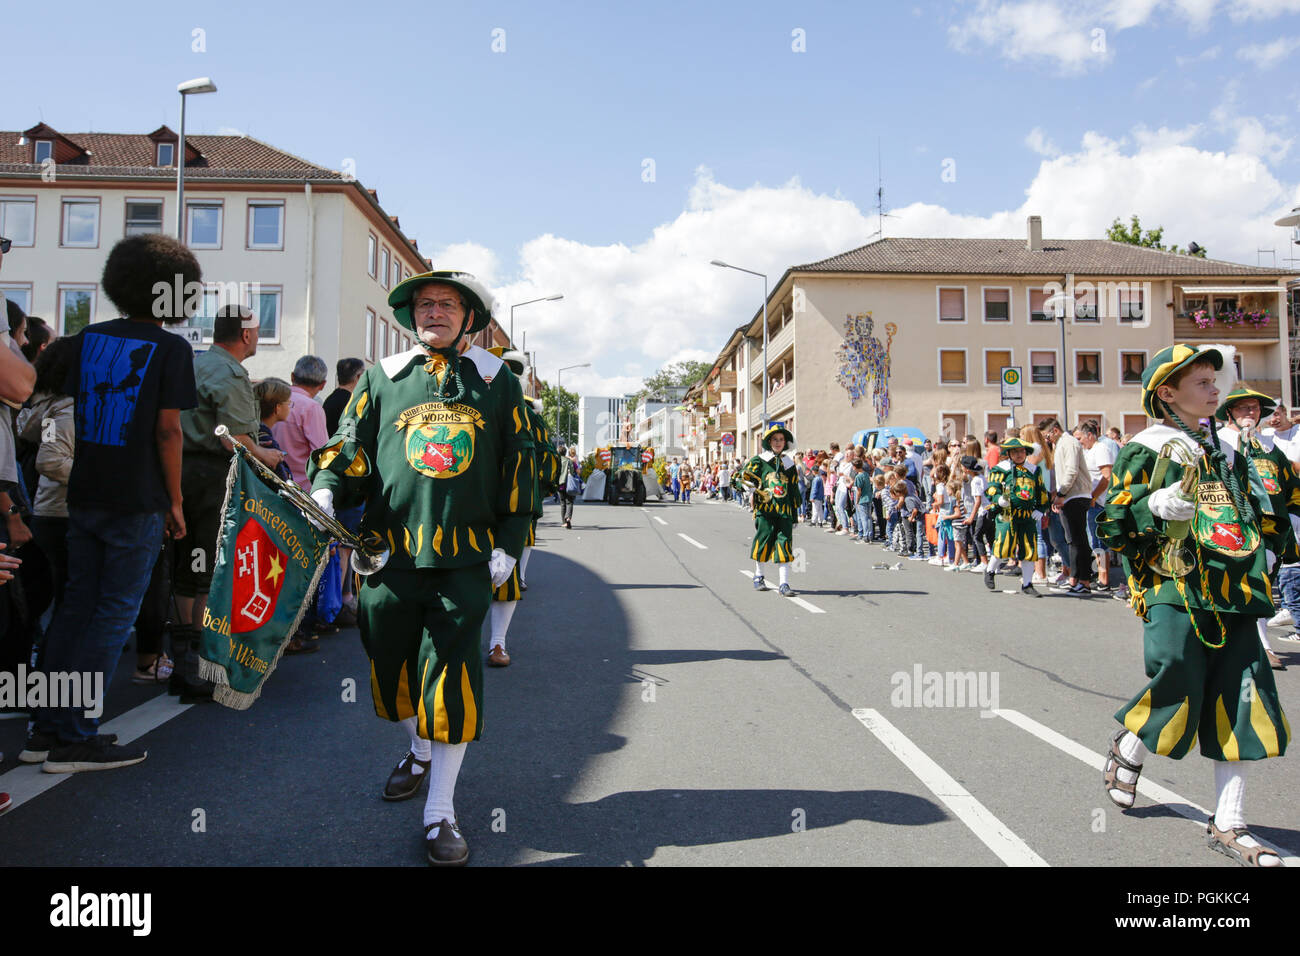 Worms, Germany. 26th Aug, 2018. Members of the Fanfare Corps of the city of Worms march in the parade. The first highlight of the 2018 Backfischfest was the big parade through the city of Worms with over 70 groups and floats. Community groups, music groups and businesses from Worms and further afield took part. Credit: Michael Debets/Pacific Press/Alamy Live News Stock Photo